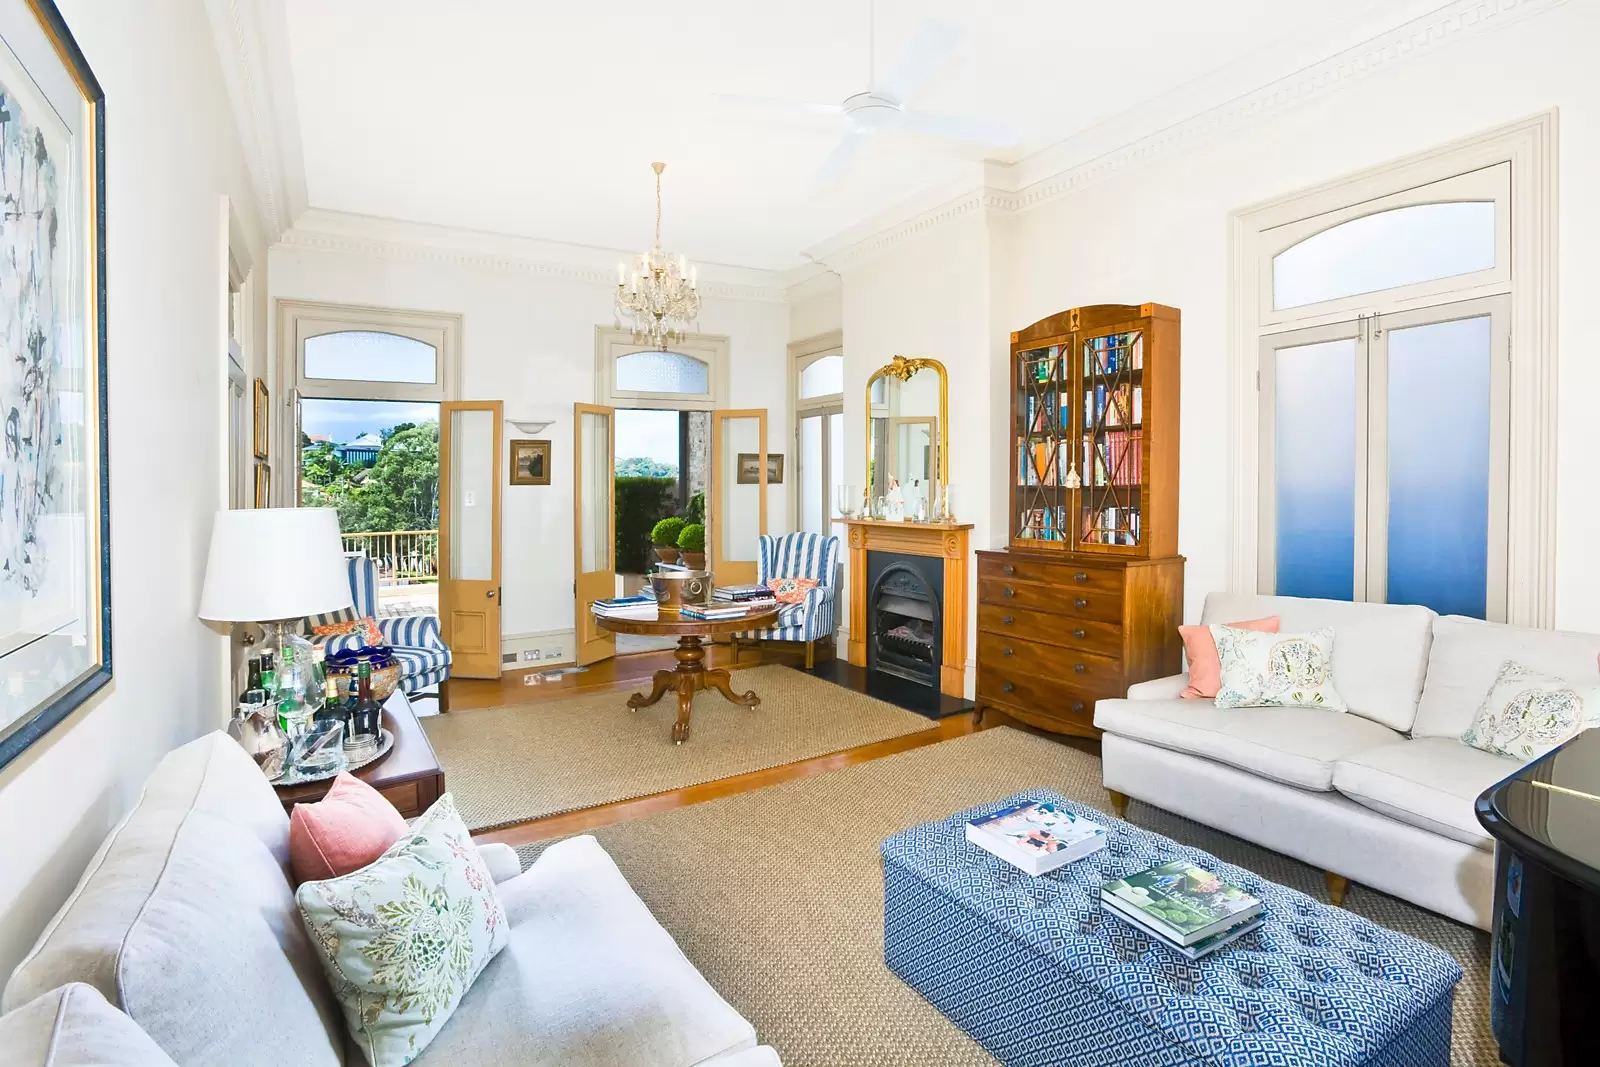 Photo #5: 'Rockleigh' 2 Richard Street, Greenwich - Sold by Sydney Sotheby's International Realty